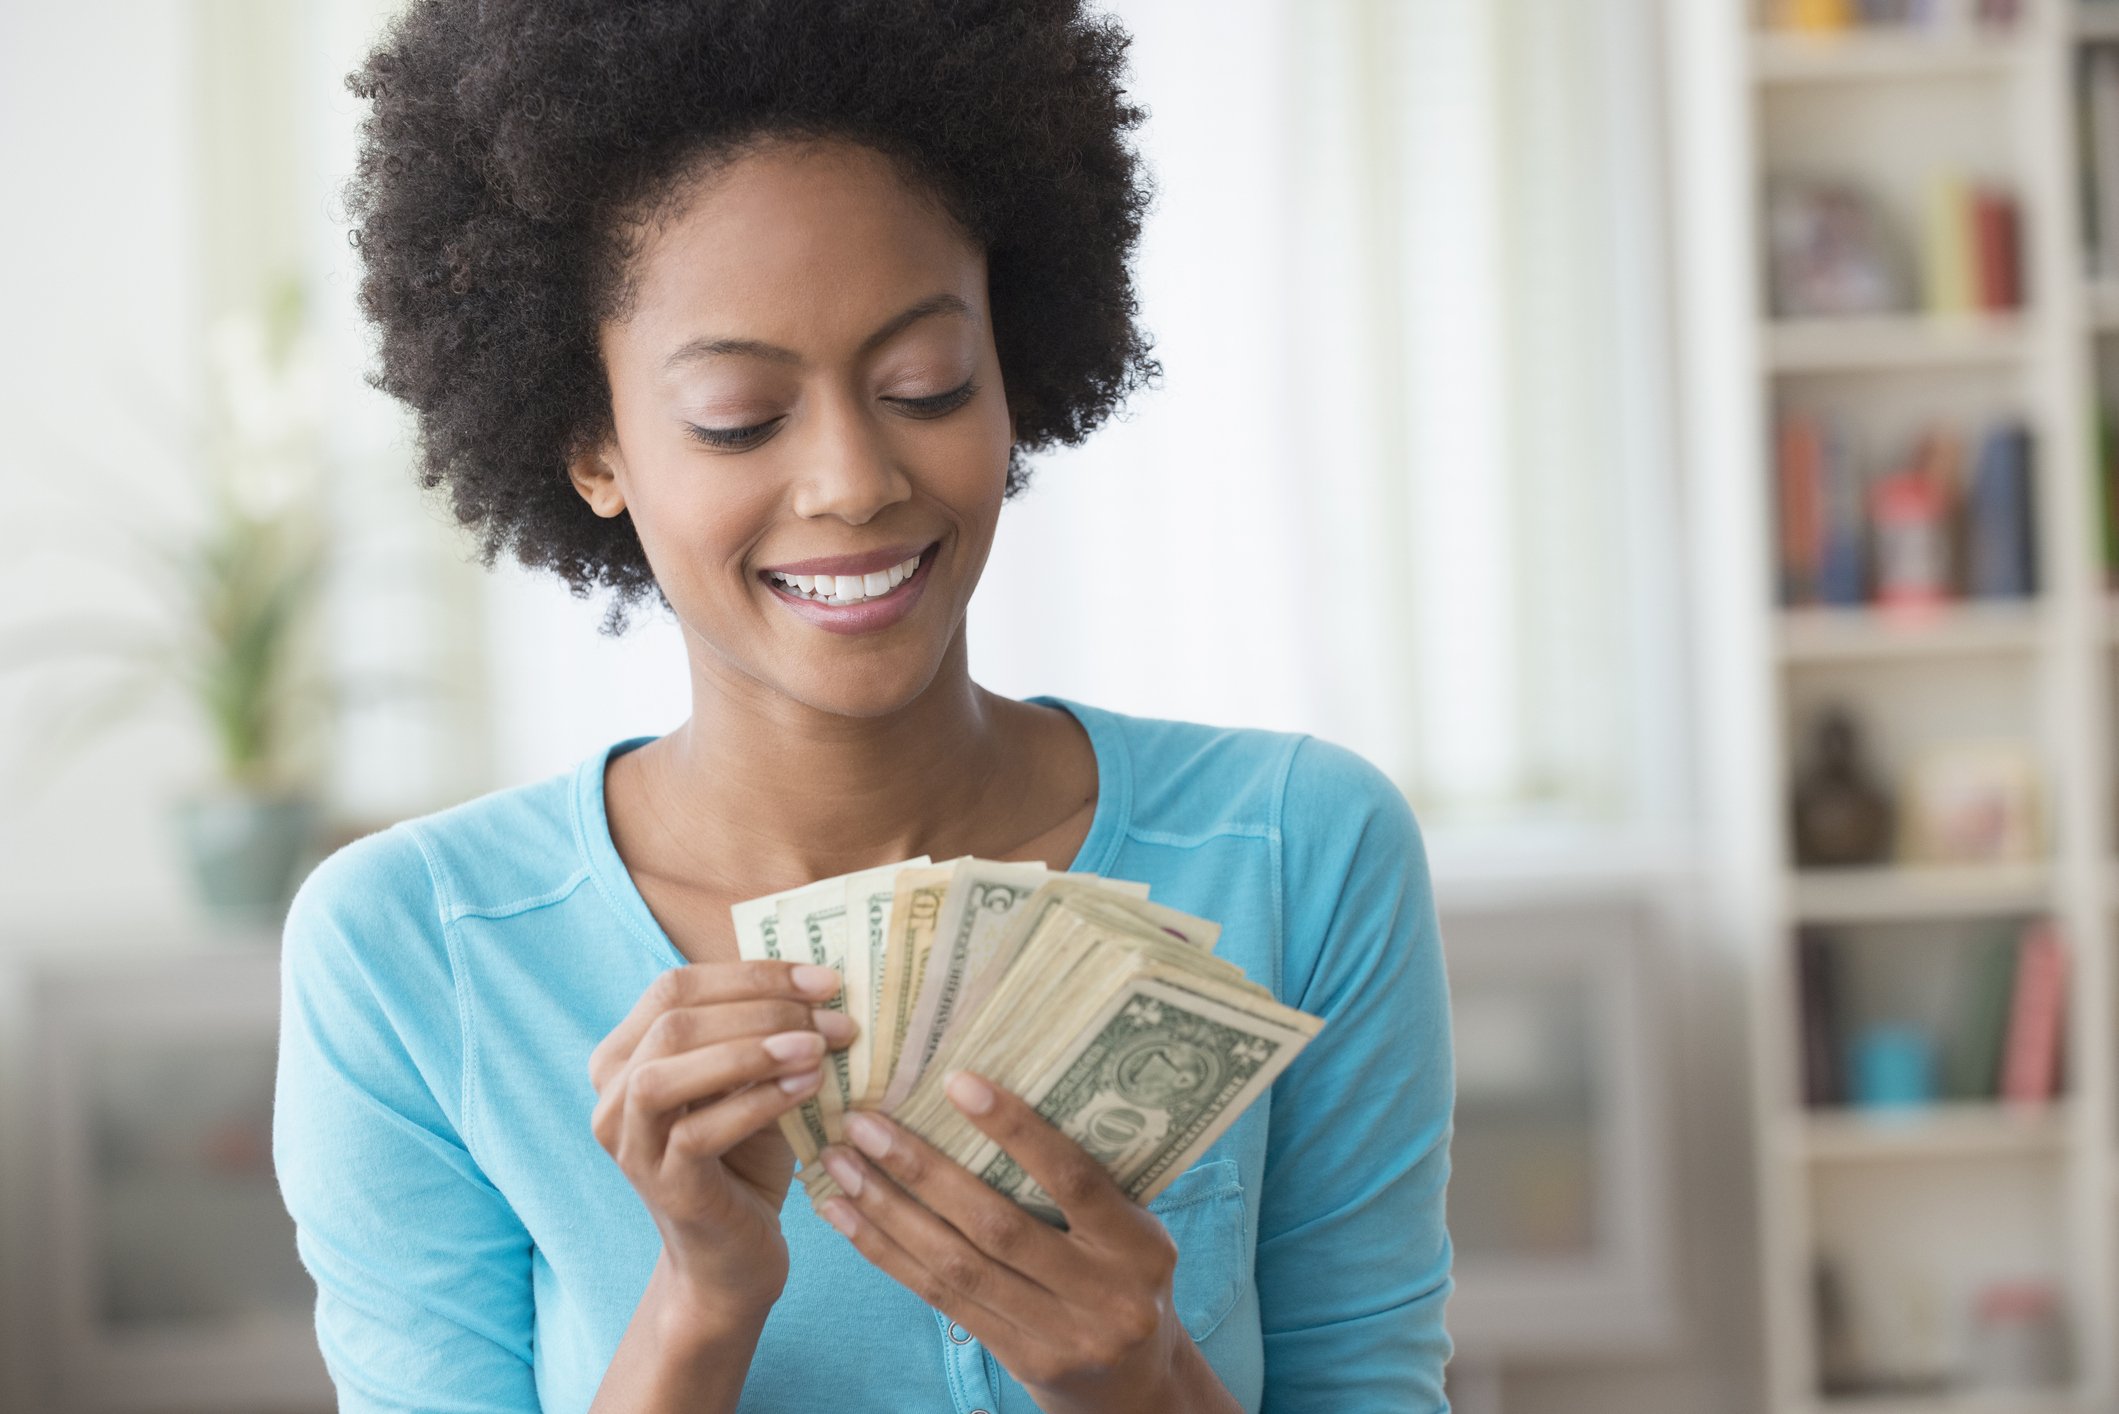 Smiling adult holds dollar bills in hand, fanned out.